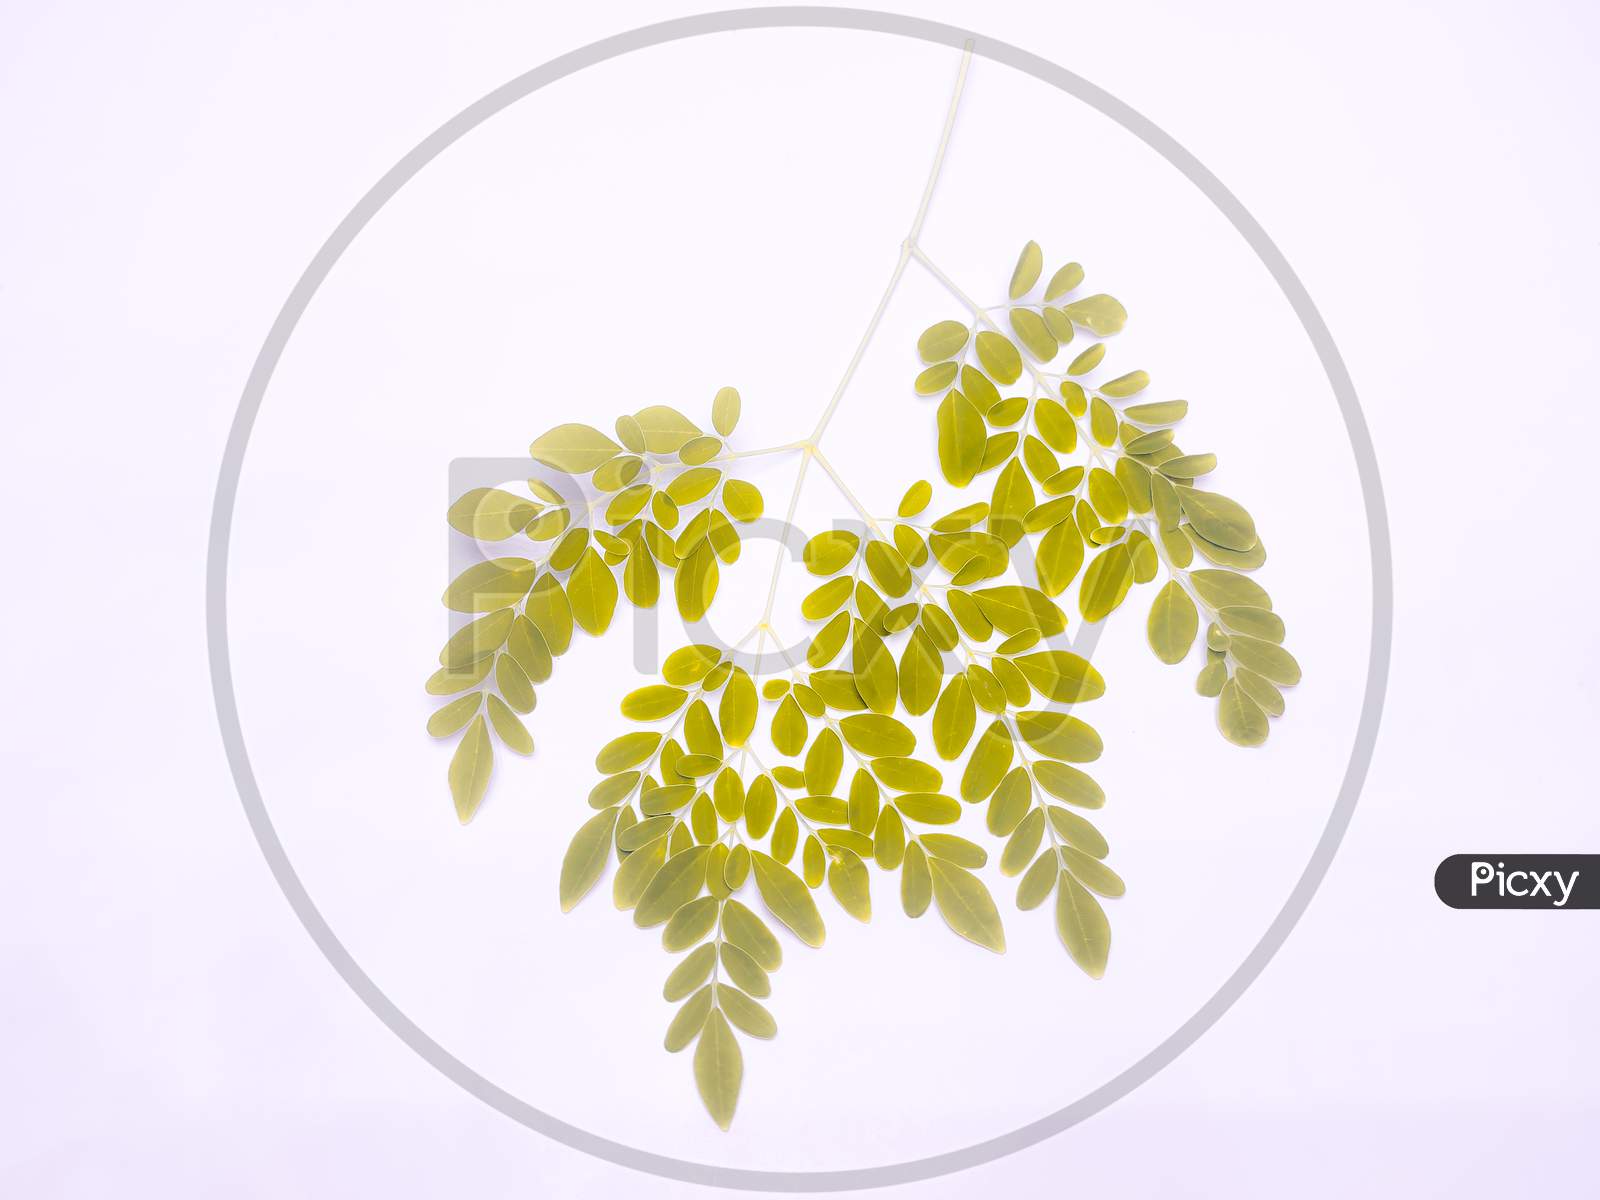 Yellow Leaves With Multiple Branches Focus At Center With Blurred And Isolated White Background